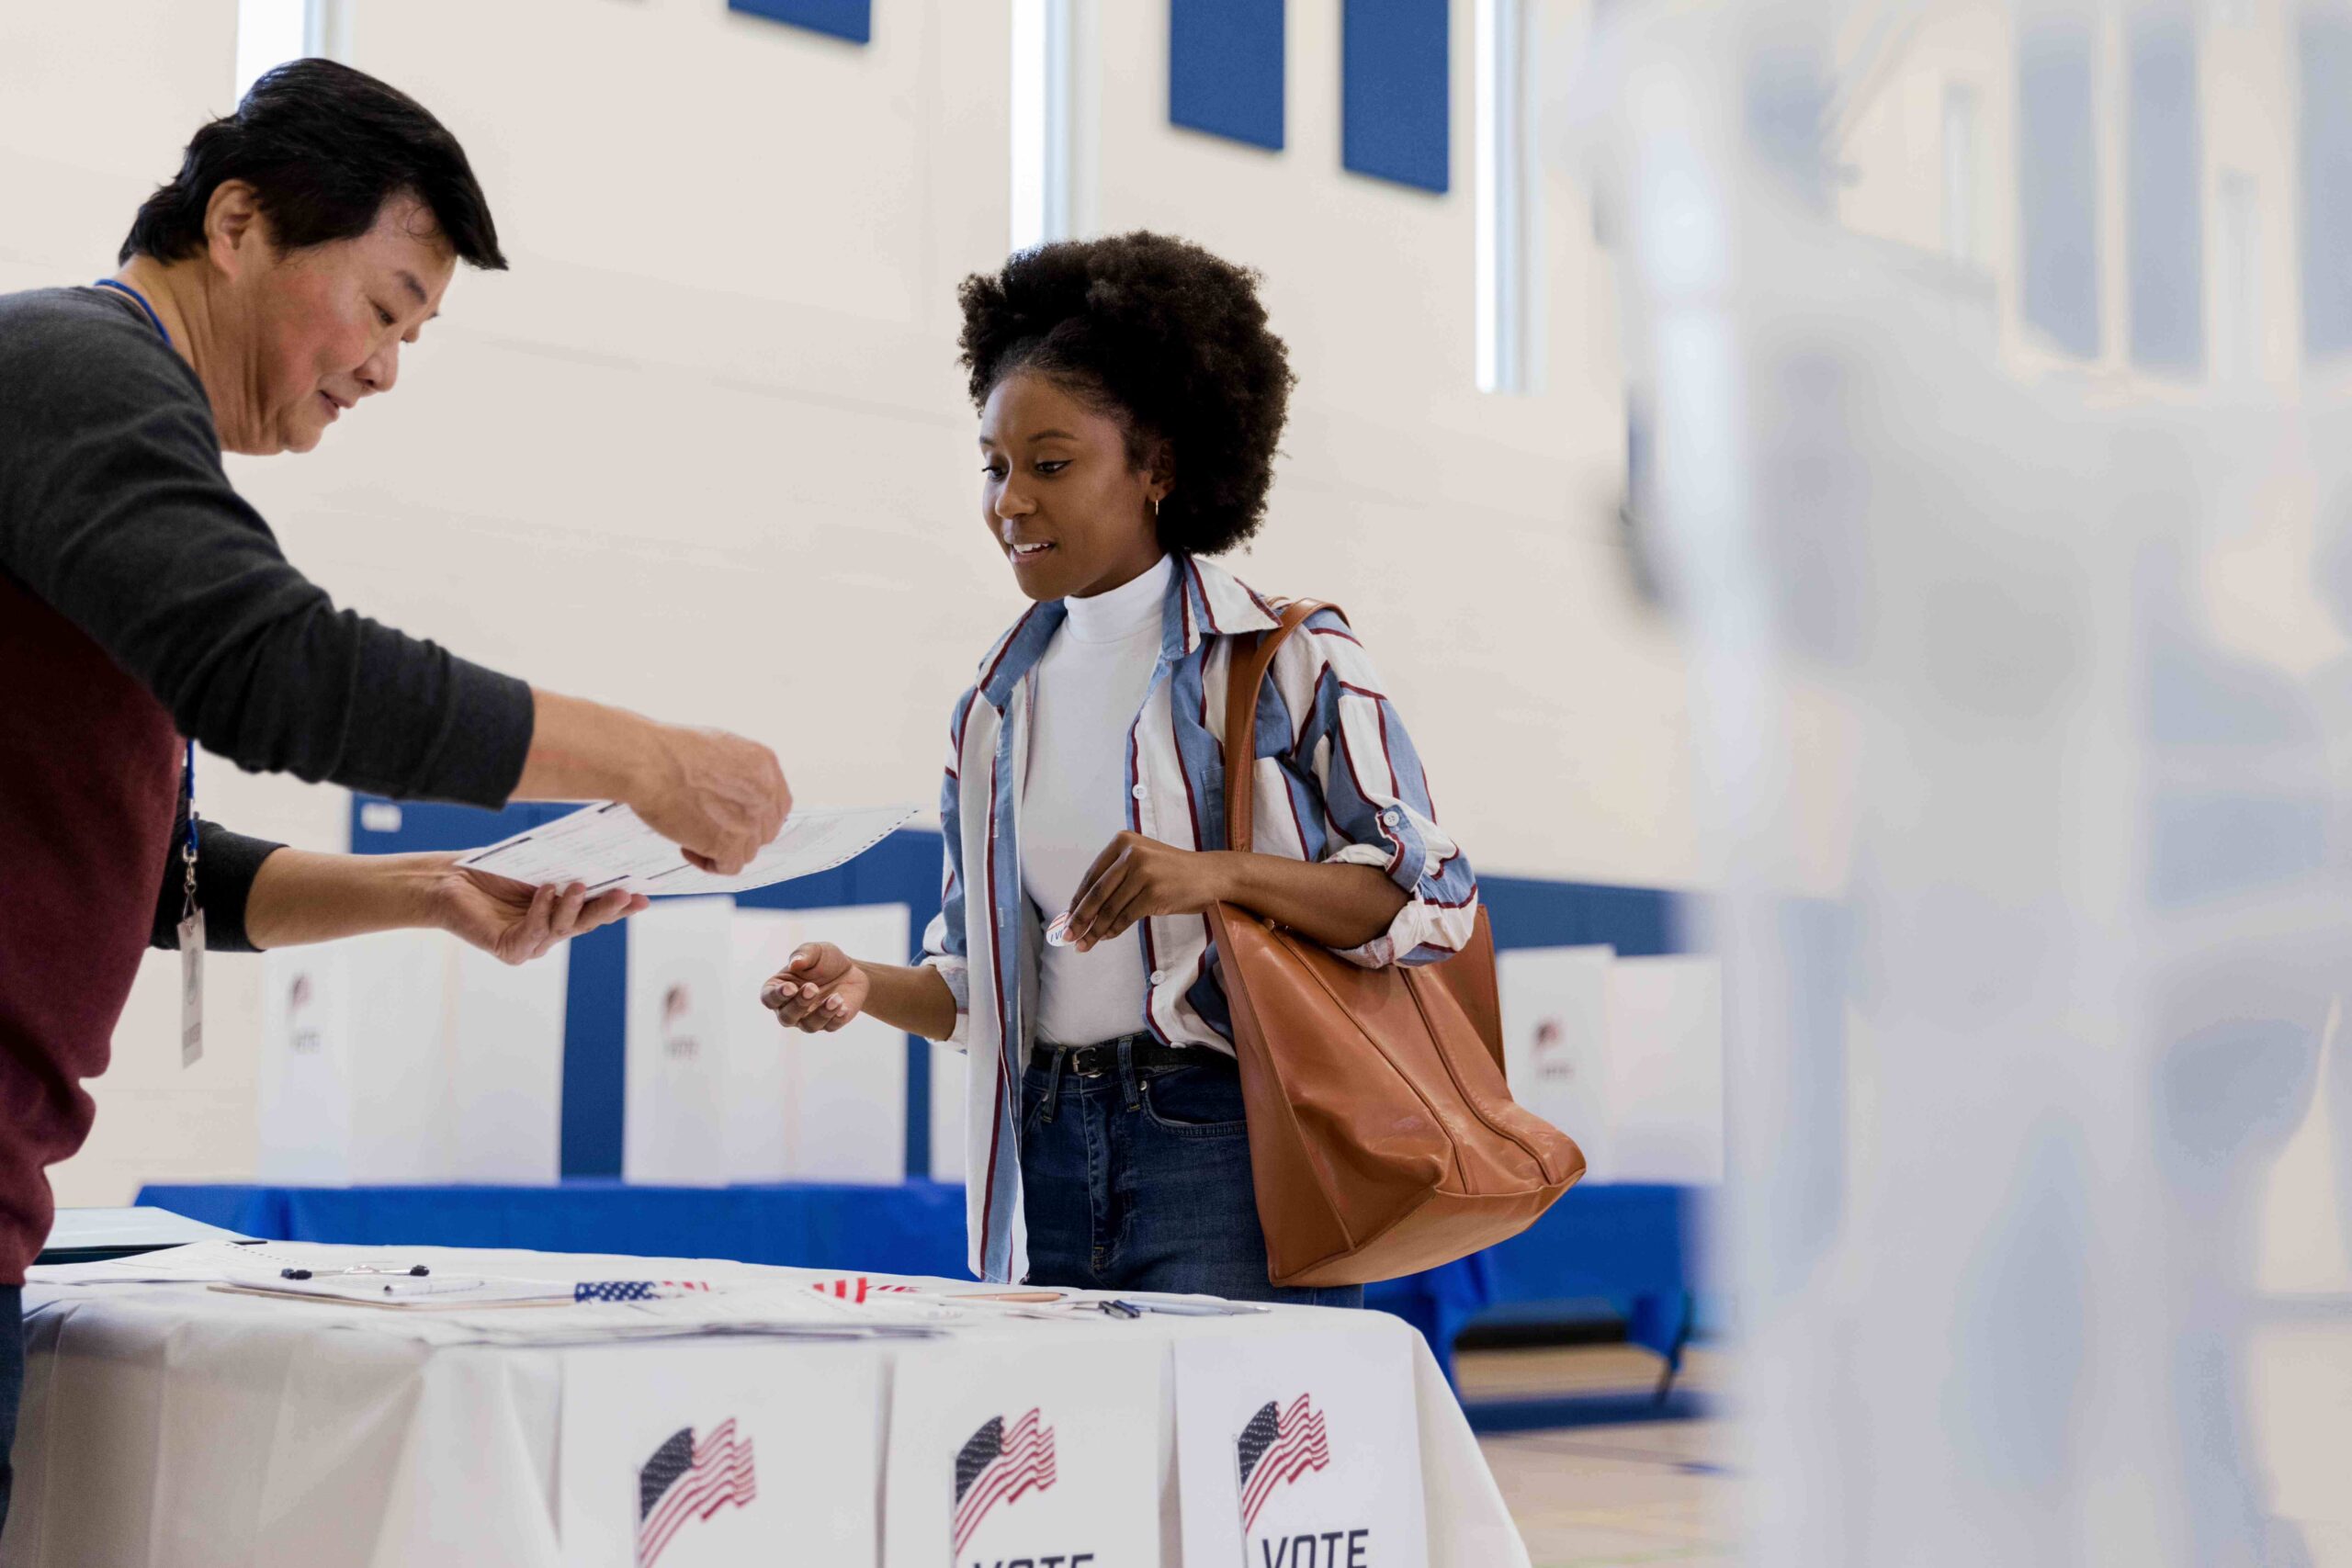 A man standing behind a table hands a woman a piece of paper describing how to get on the ballot.